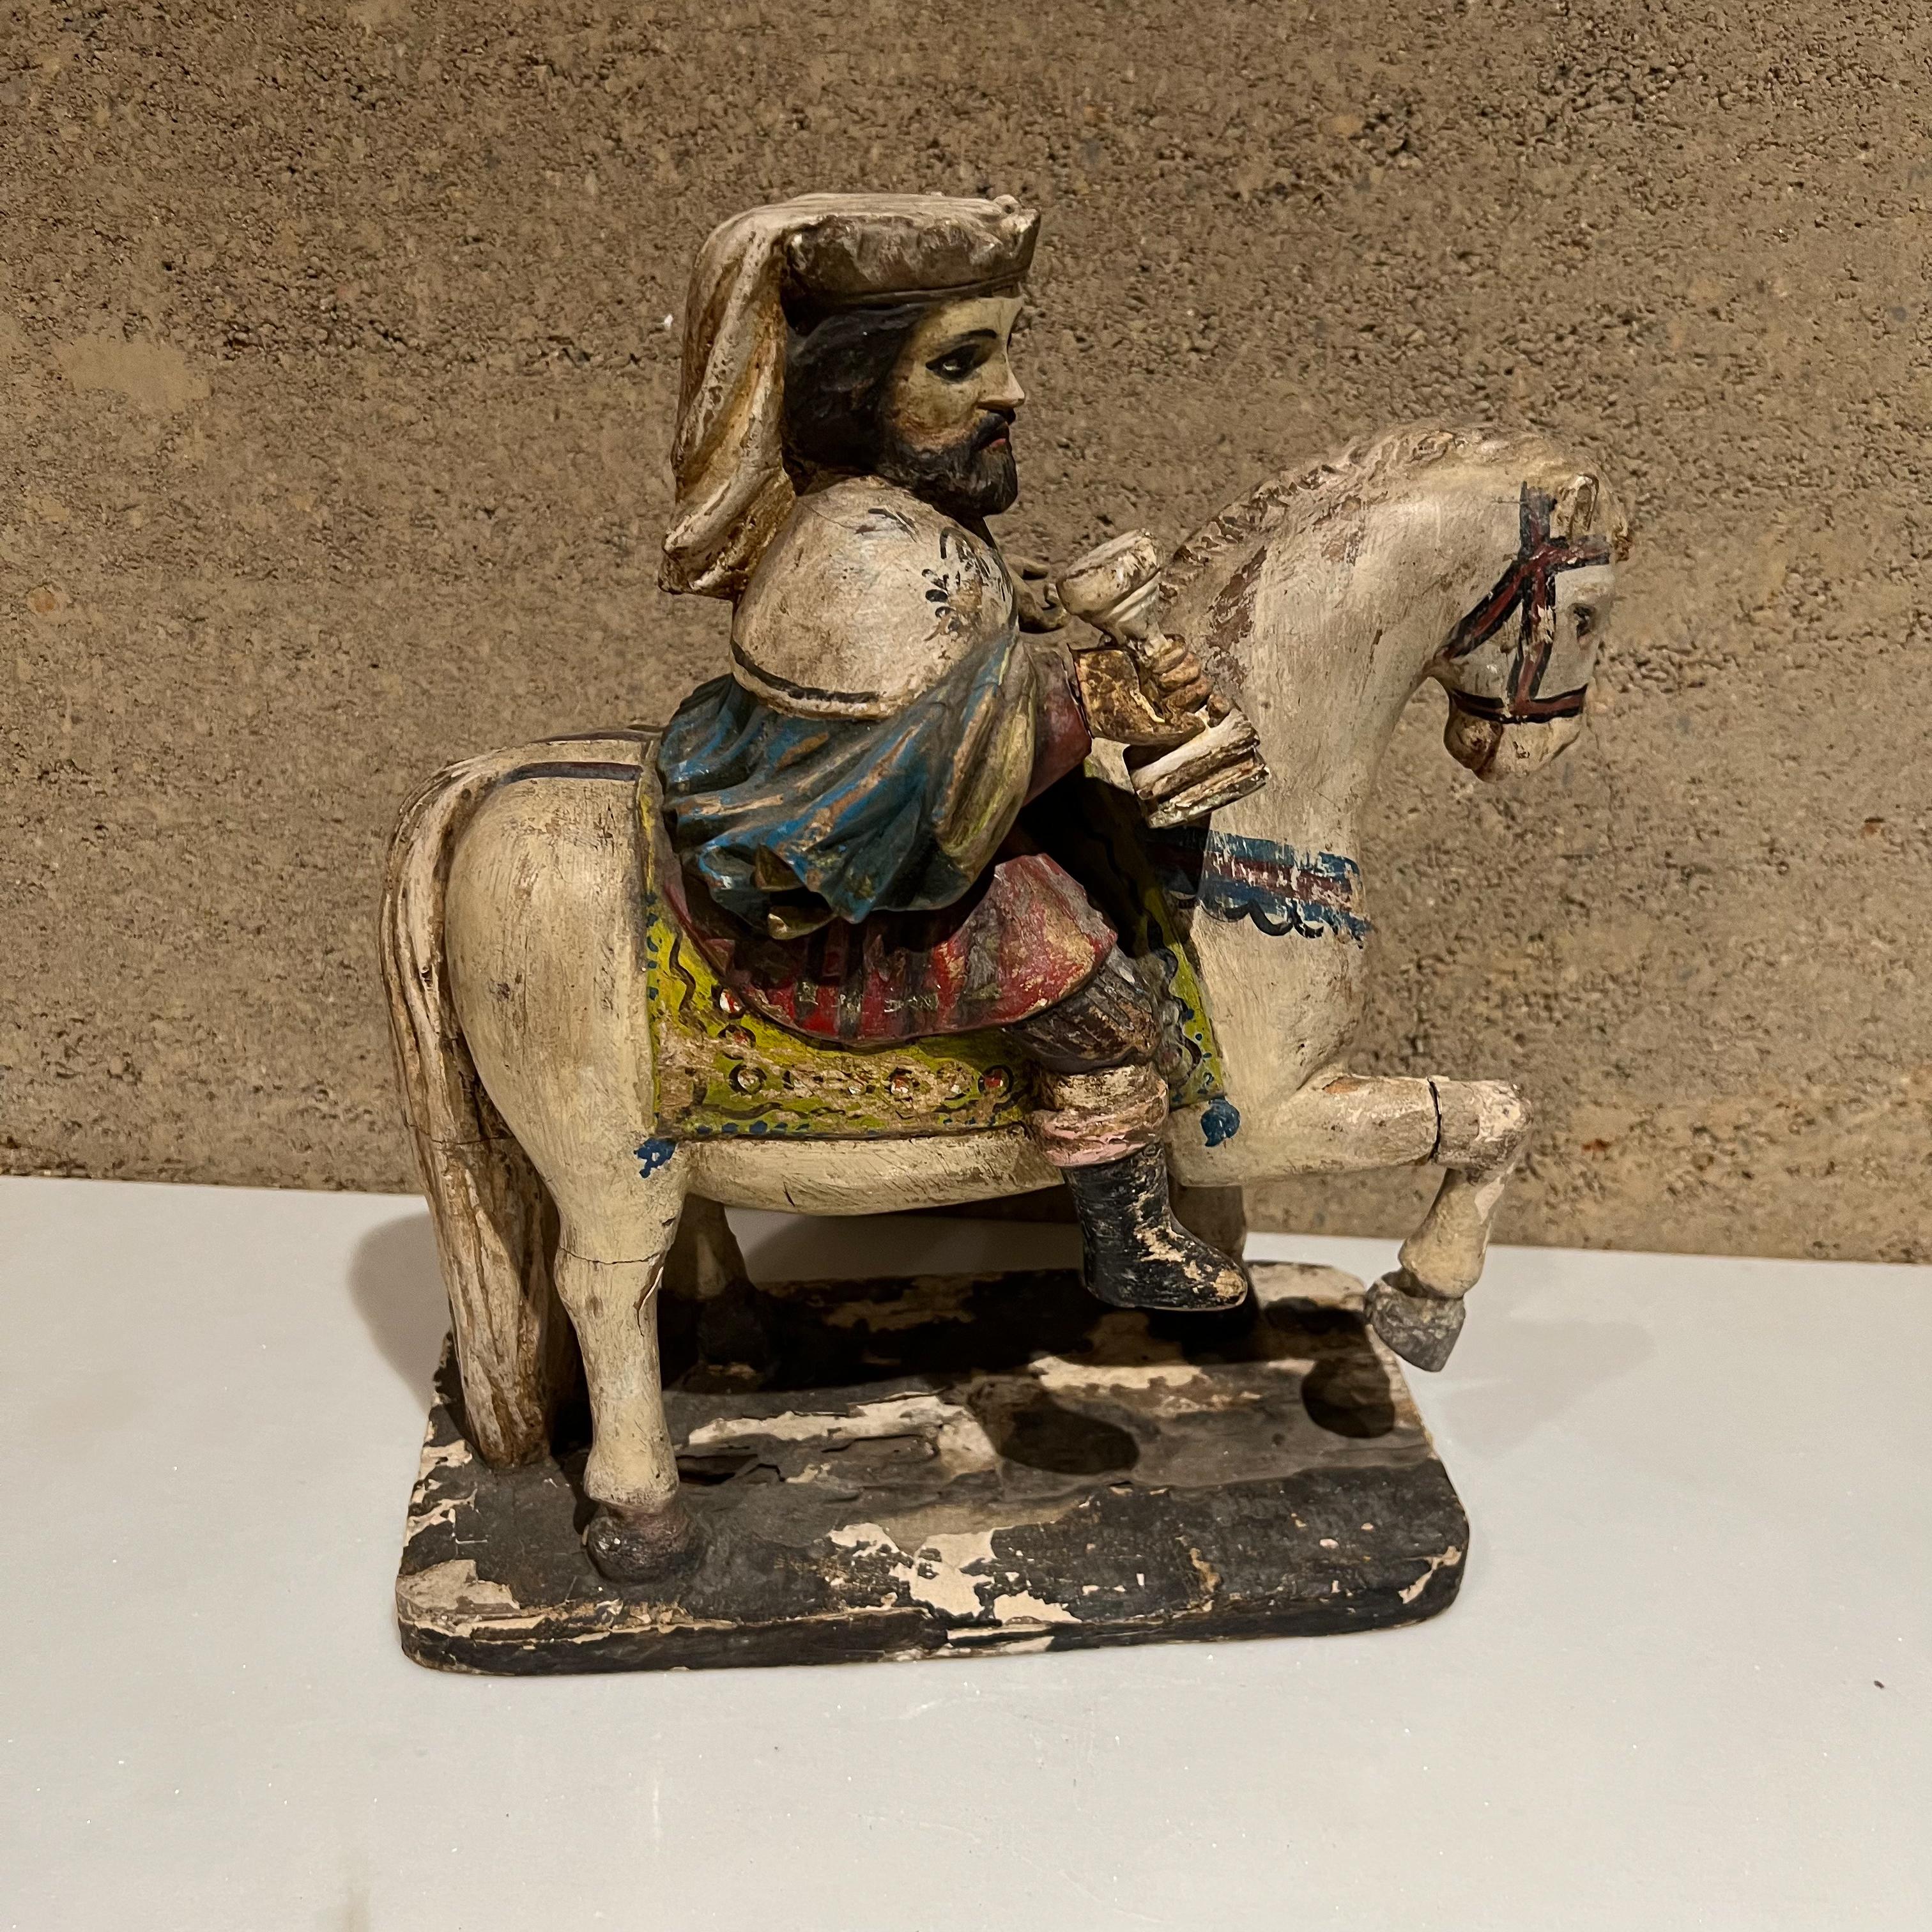 19th Century Spanish Art Sculpture apostle St James the Great on majestic customary white horse political religious figure Santiago Matamoros 
Beautifully hand painted carved in solid wood decorated by hand.
11.5 tall x 10.5 w x 4.75 d
Original